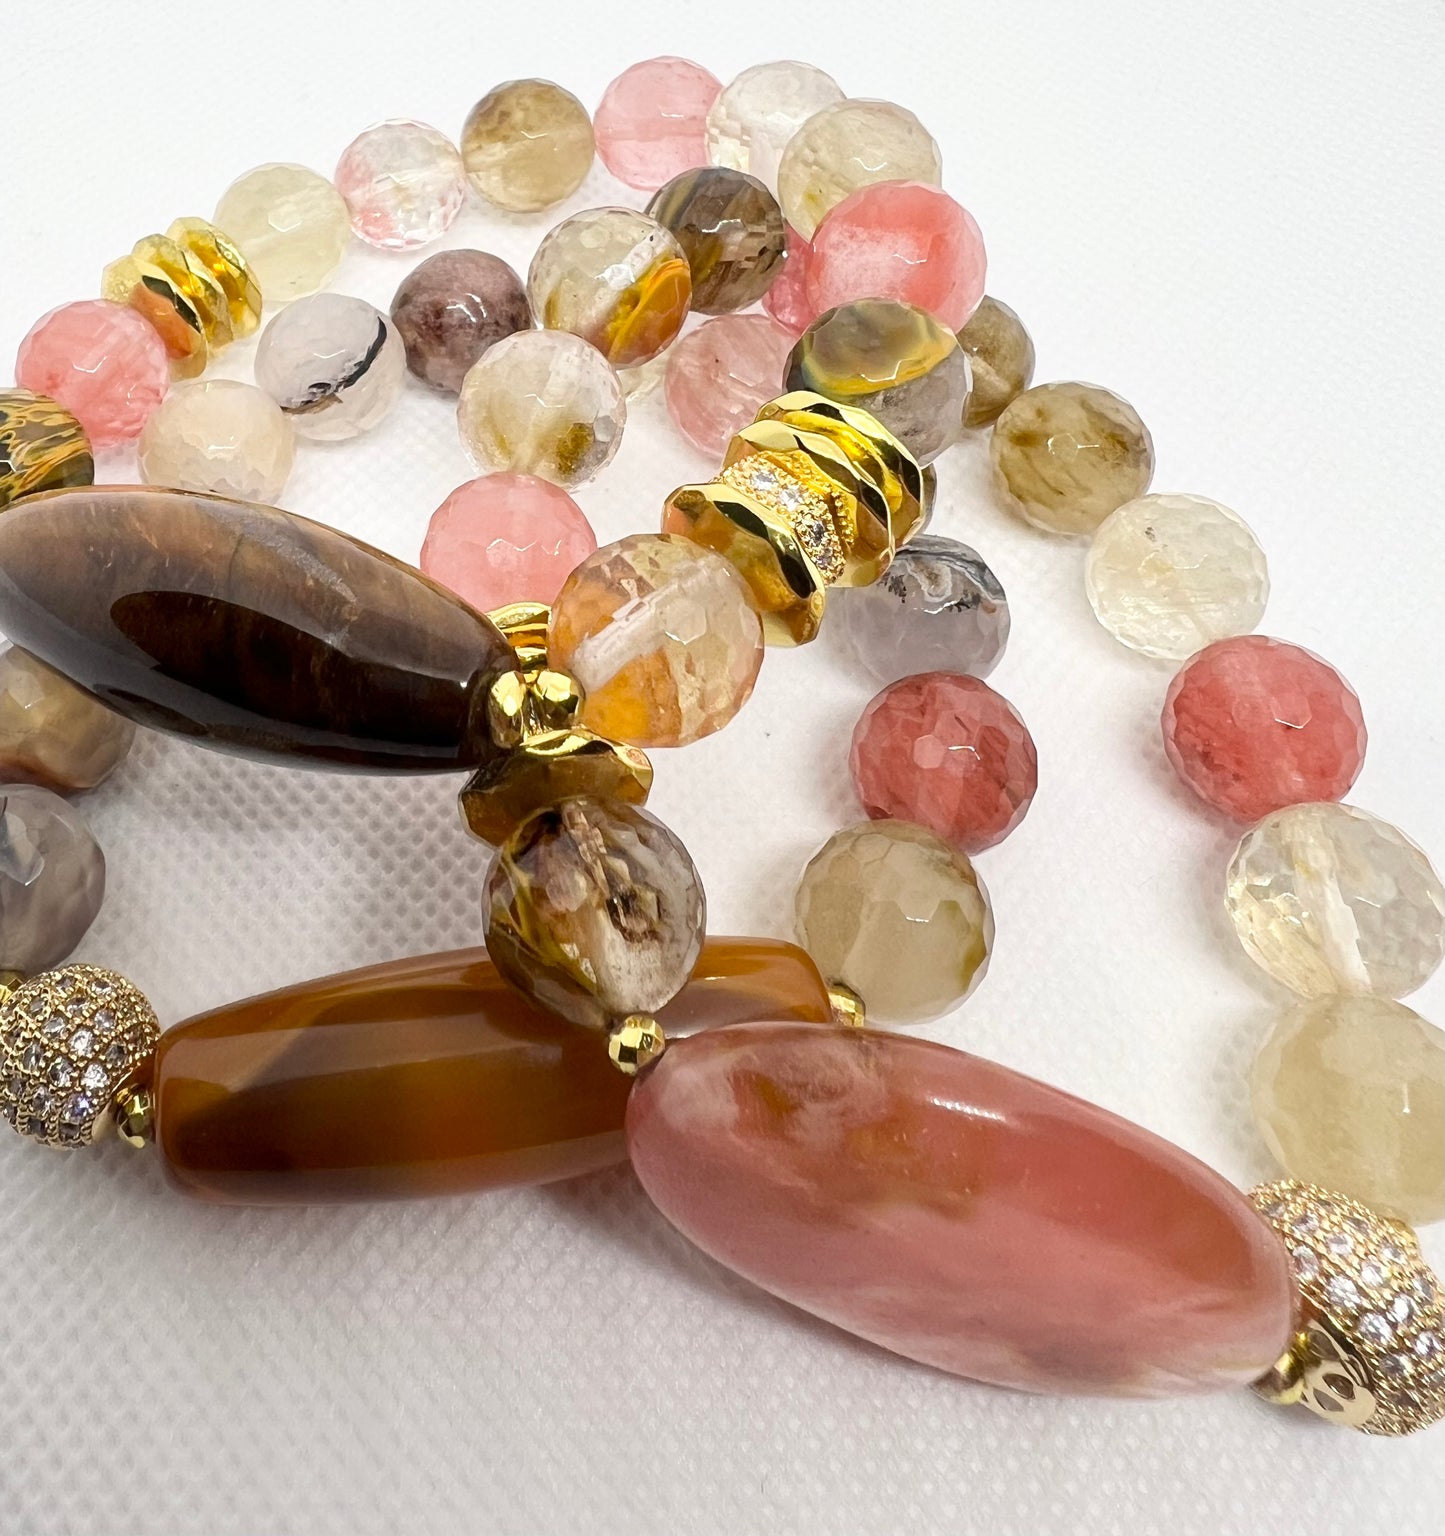 Agates and Tiger Eye, oh my!